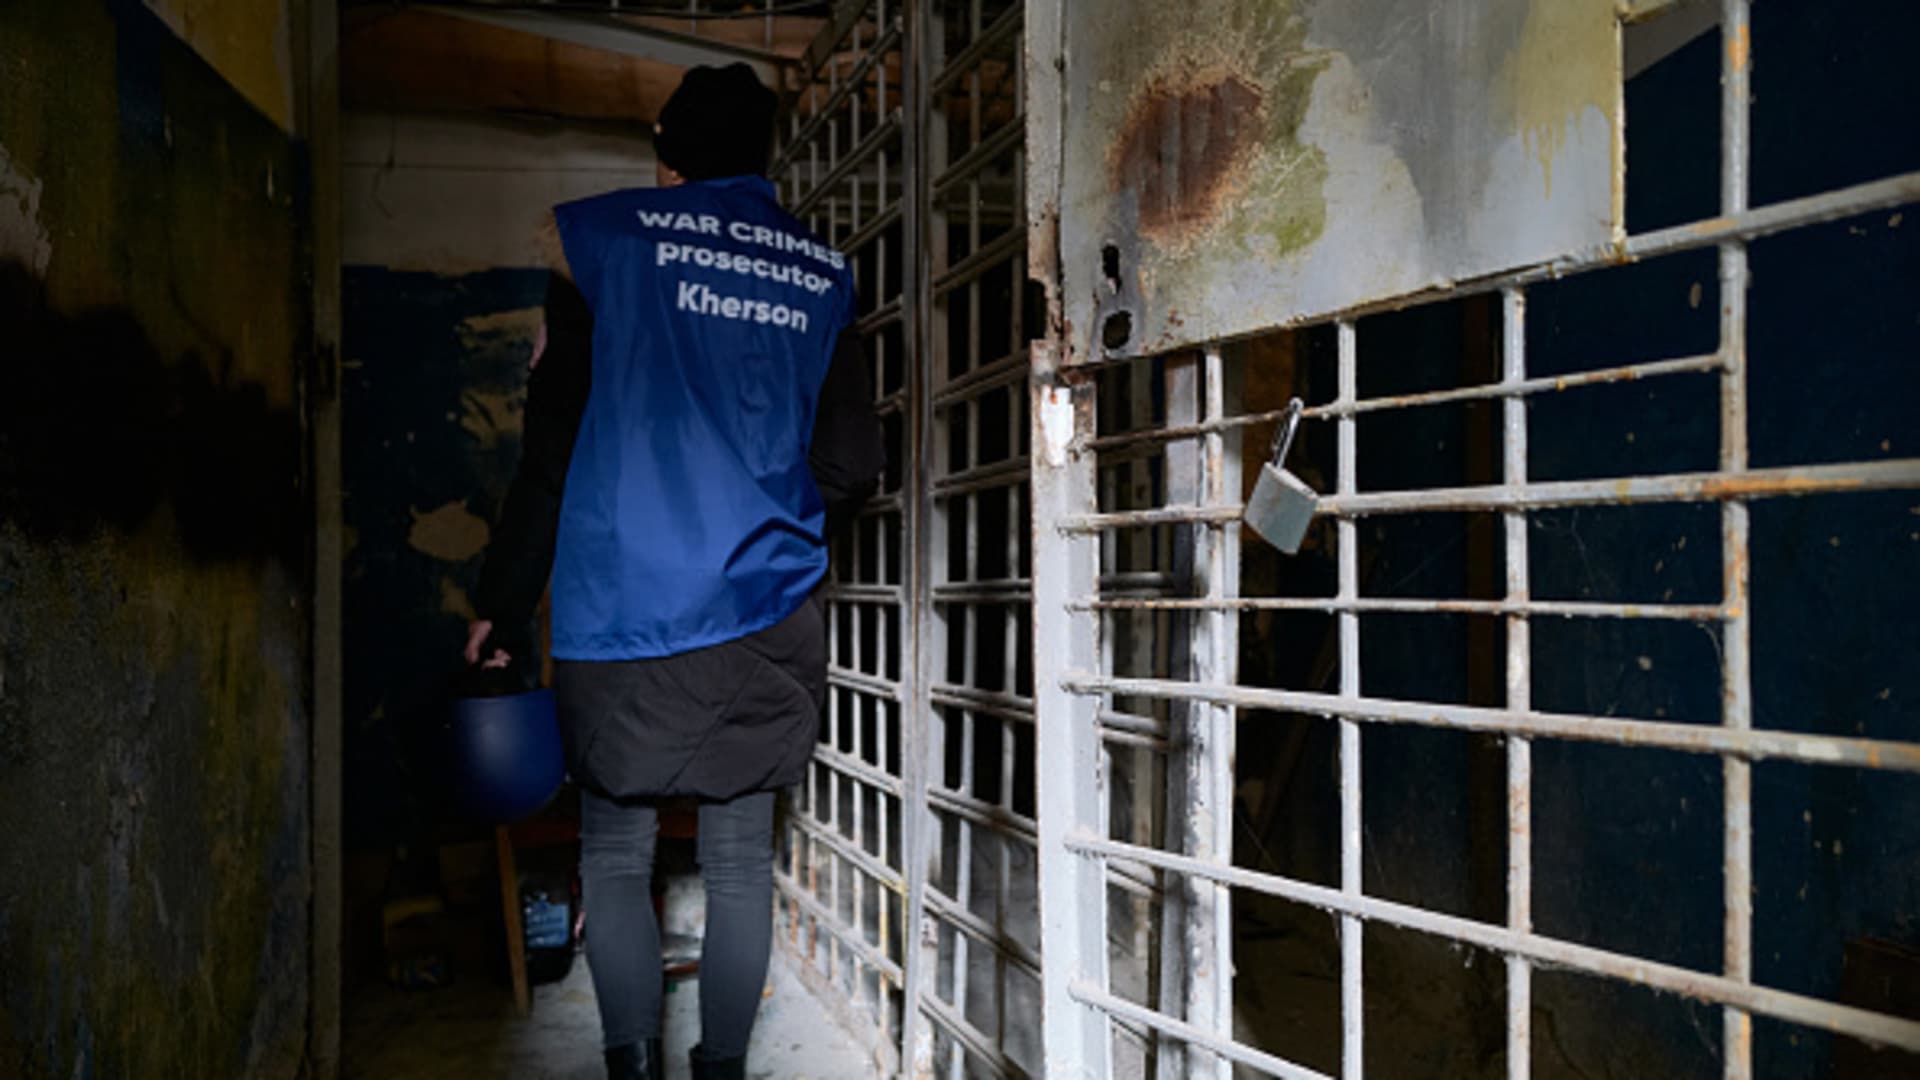 Officers of the War Crimes Prosecutor office and police officers investigate war crimes committed by the Russian occupying forces on the local civilian population in the basements and rooms of Ukrainian penitentiary buildings on January 4, 2023 in Kherson, Ukraine.